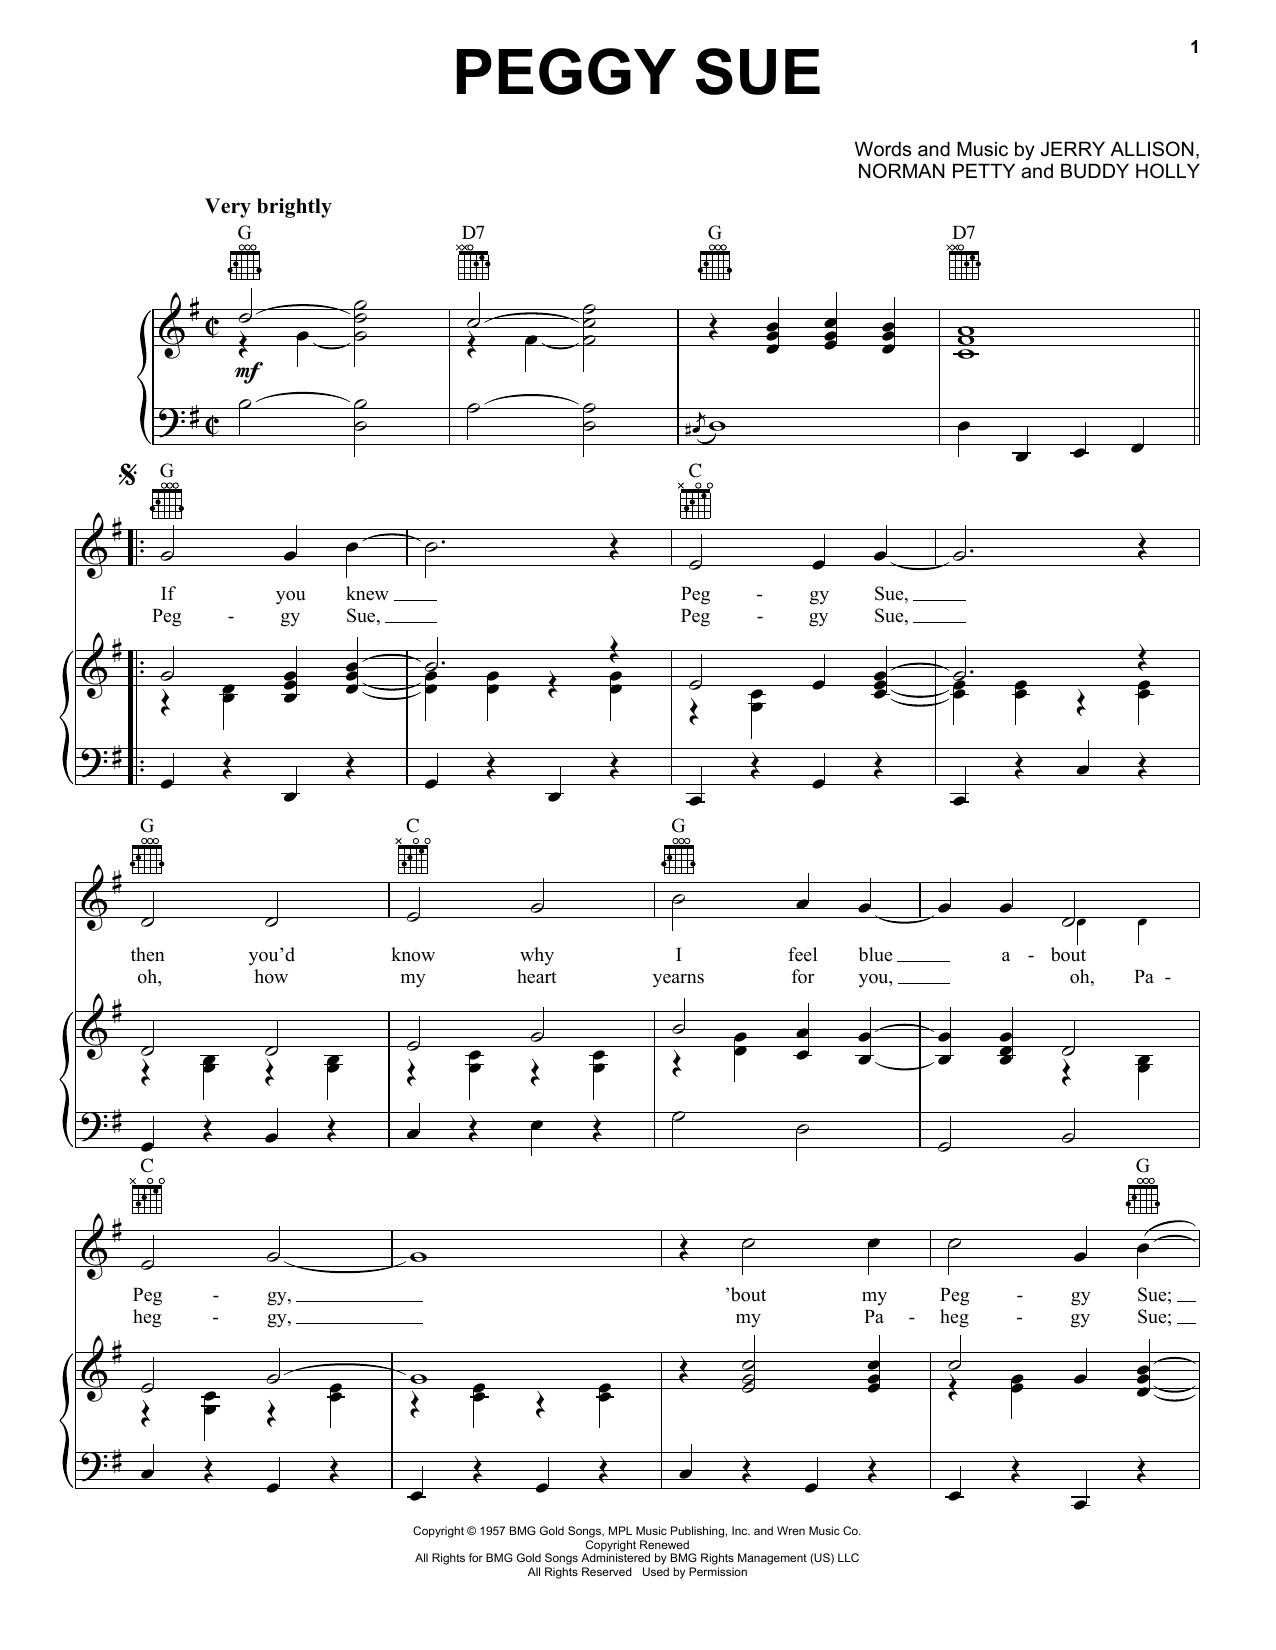 Download Buddy Holly Peggy Sue Sheet Music